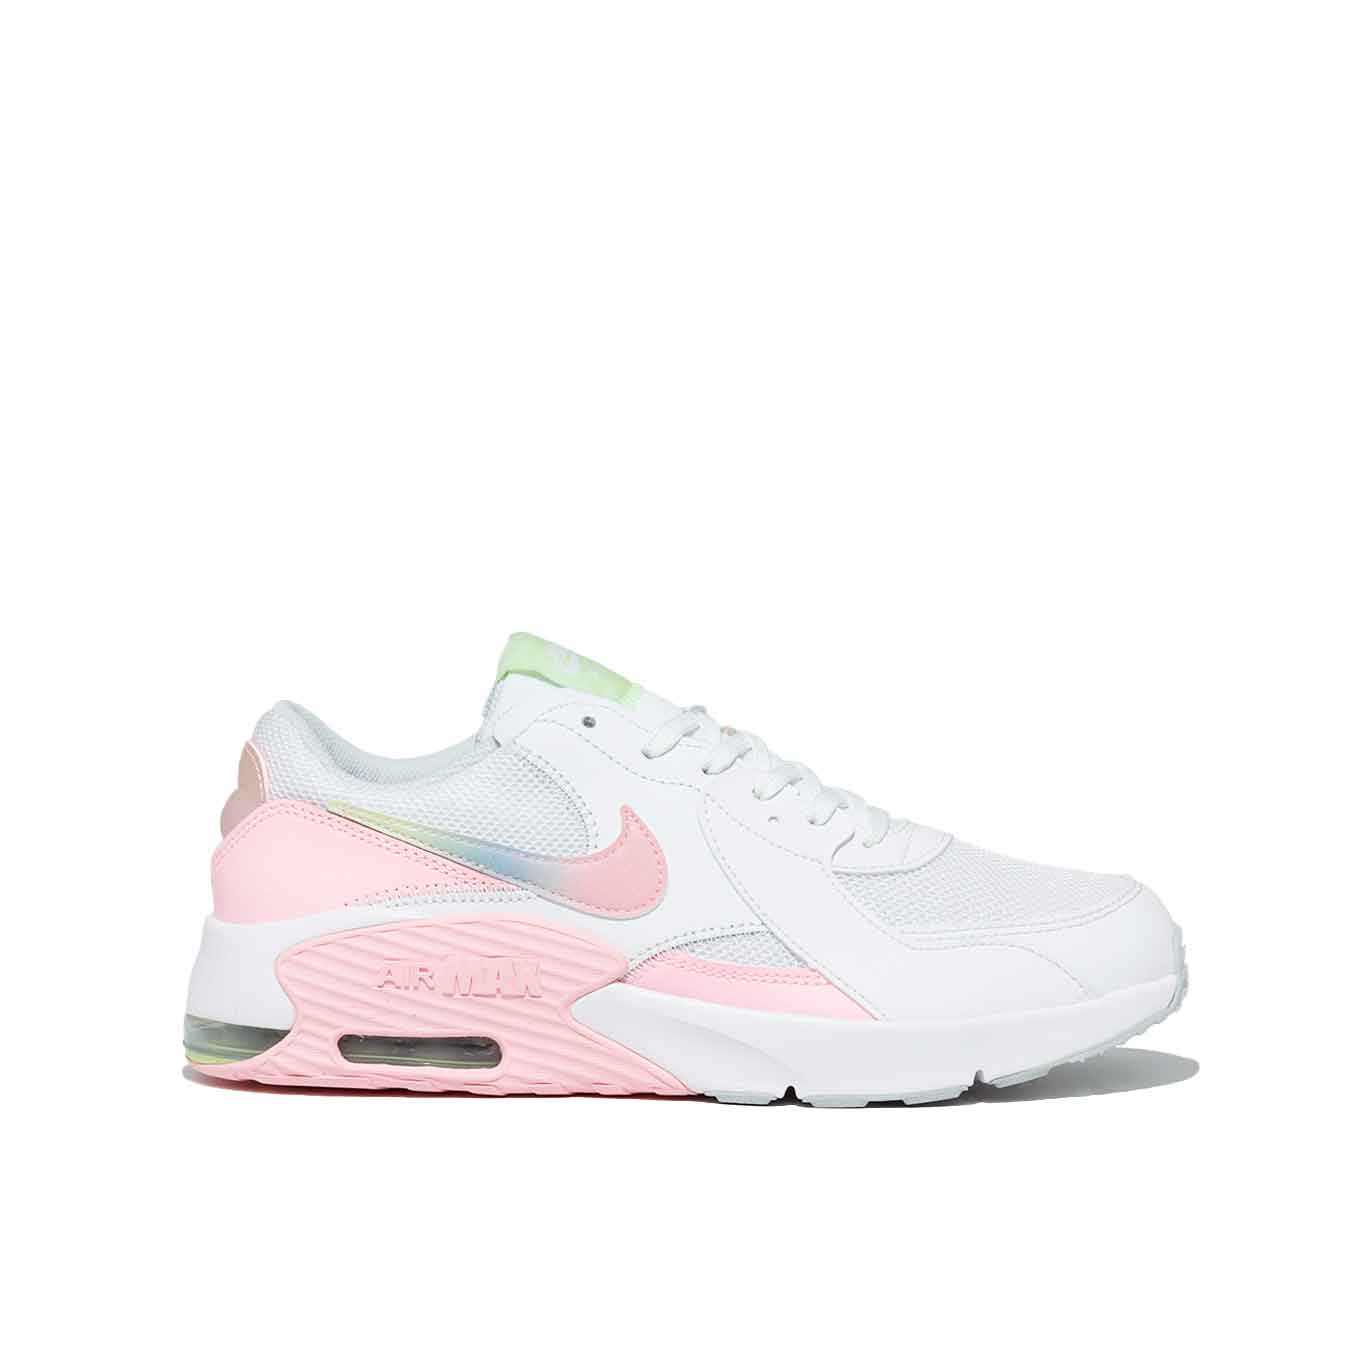 Tenis AIR MAX EXCEE Mujer CW5829-100 Blanco/Rosa